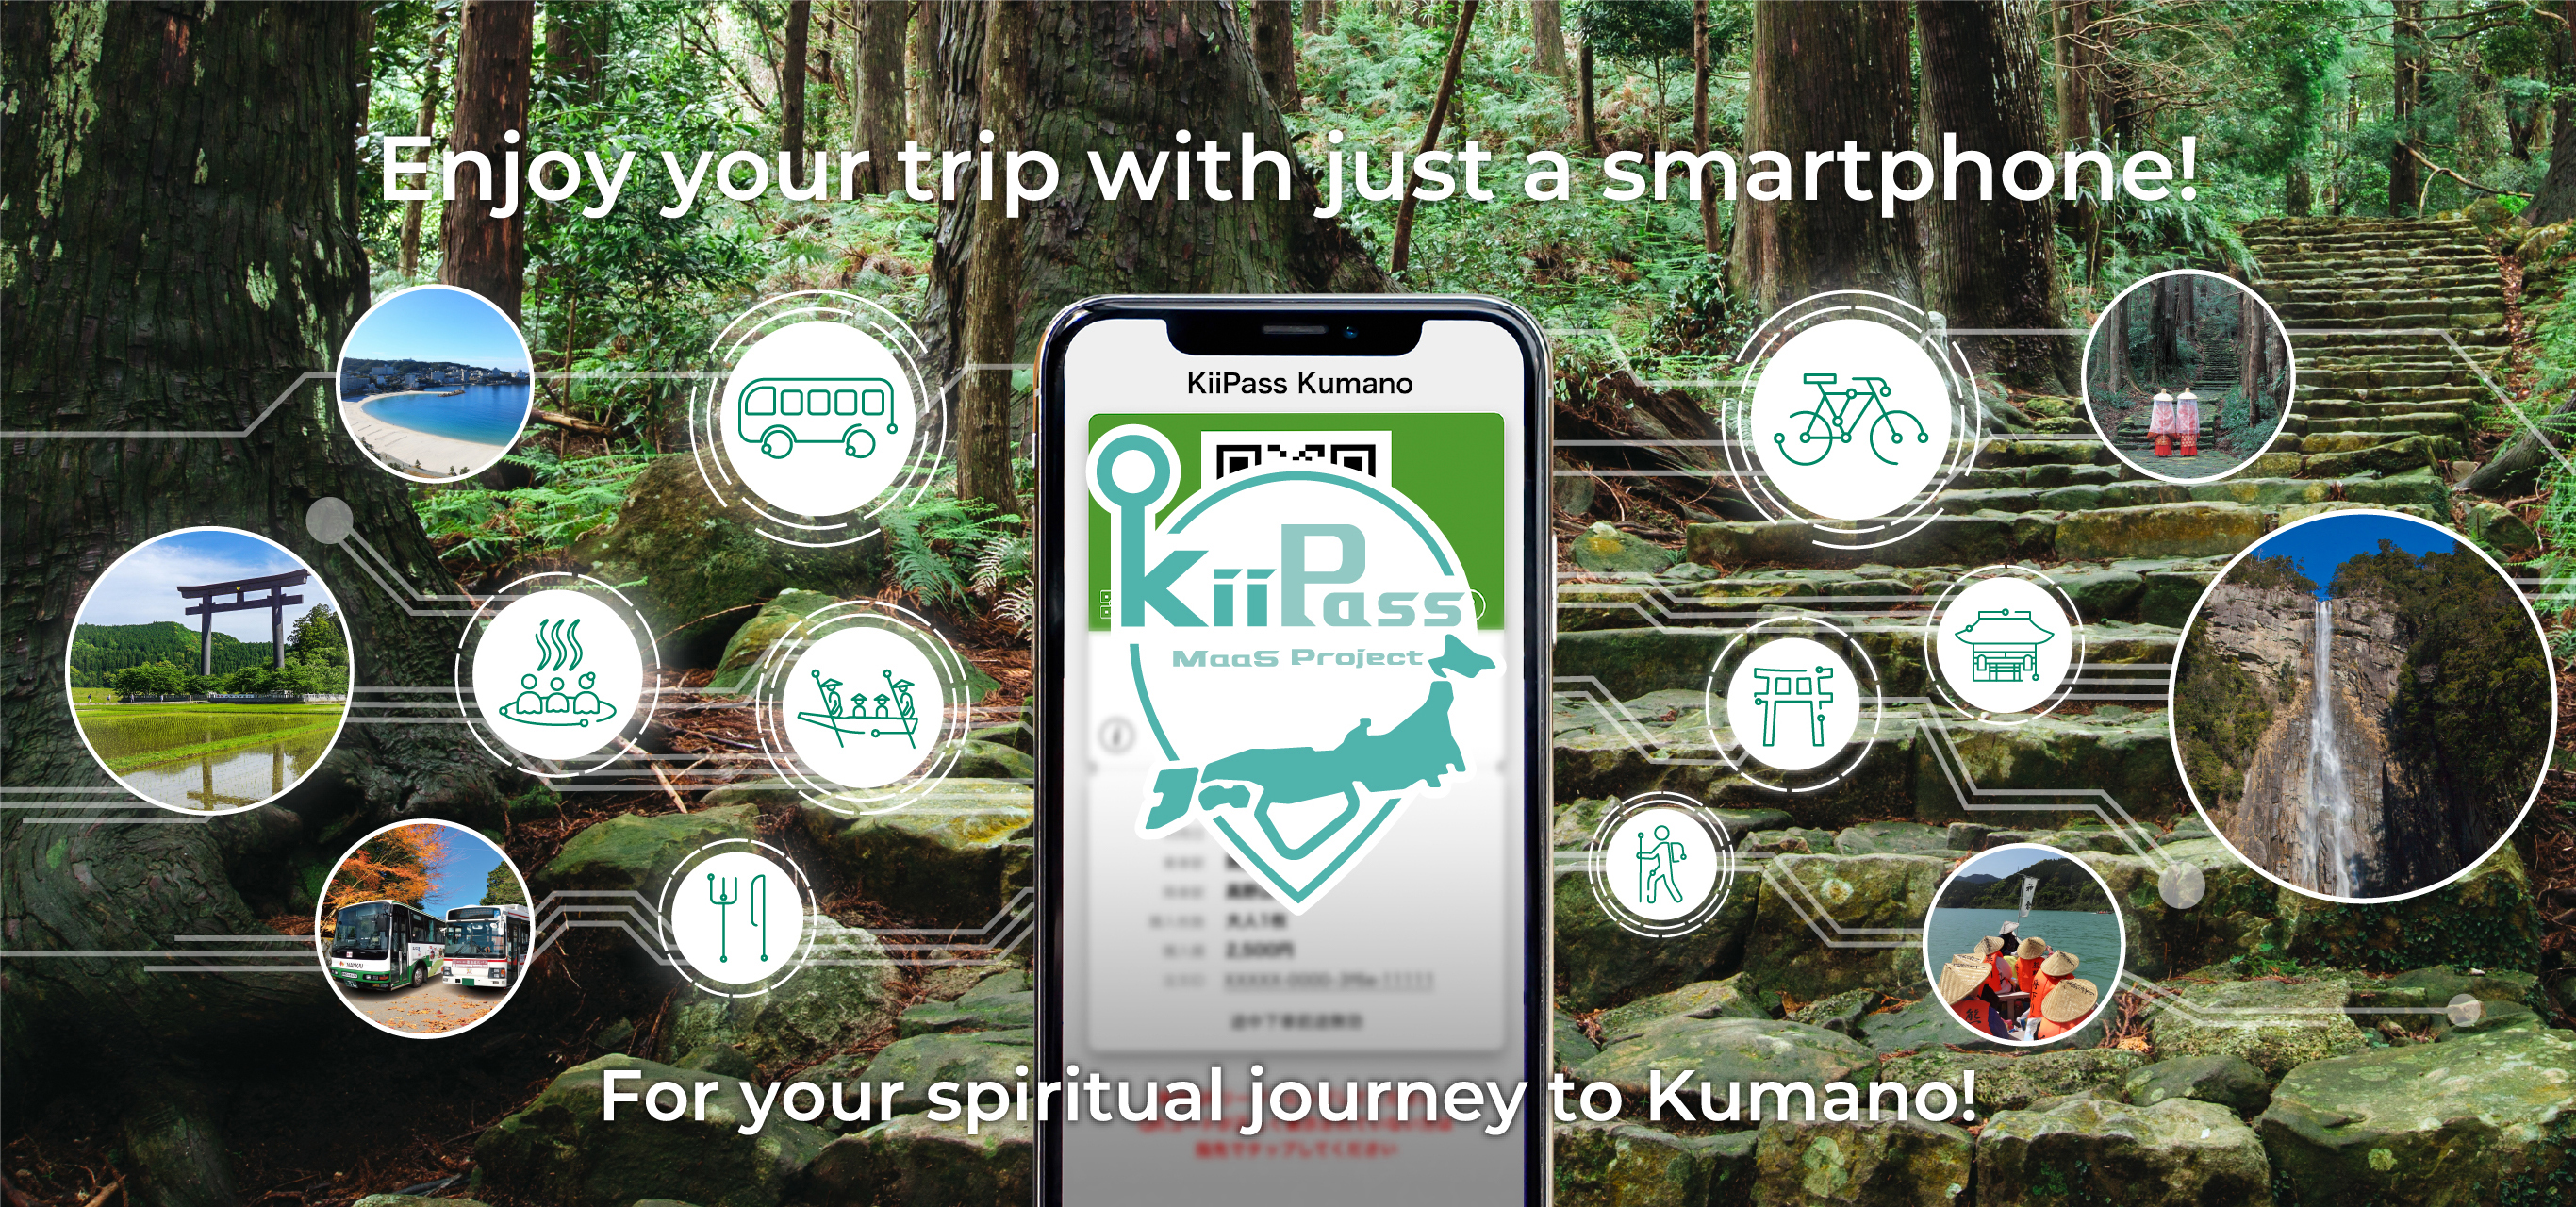 Enjoy your trip with just a smartphone!For your spiritual journey to Kumano!